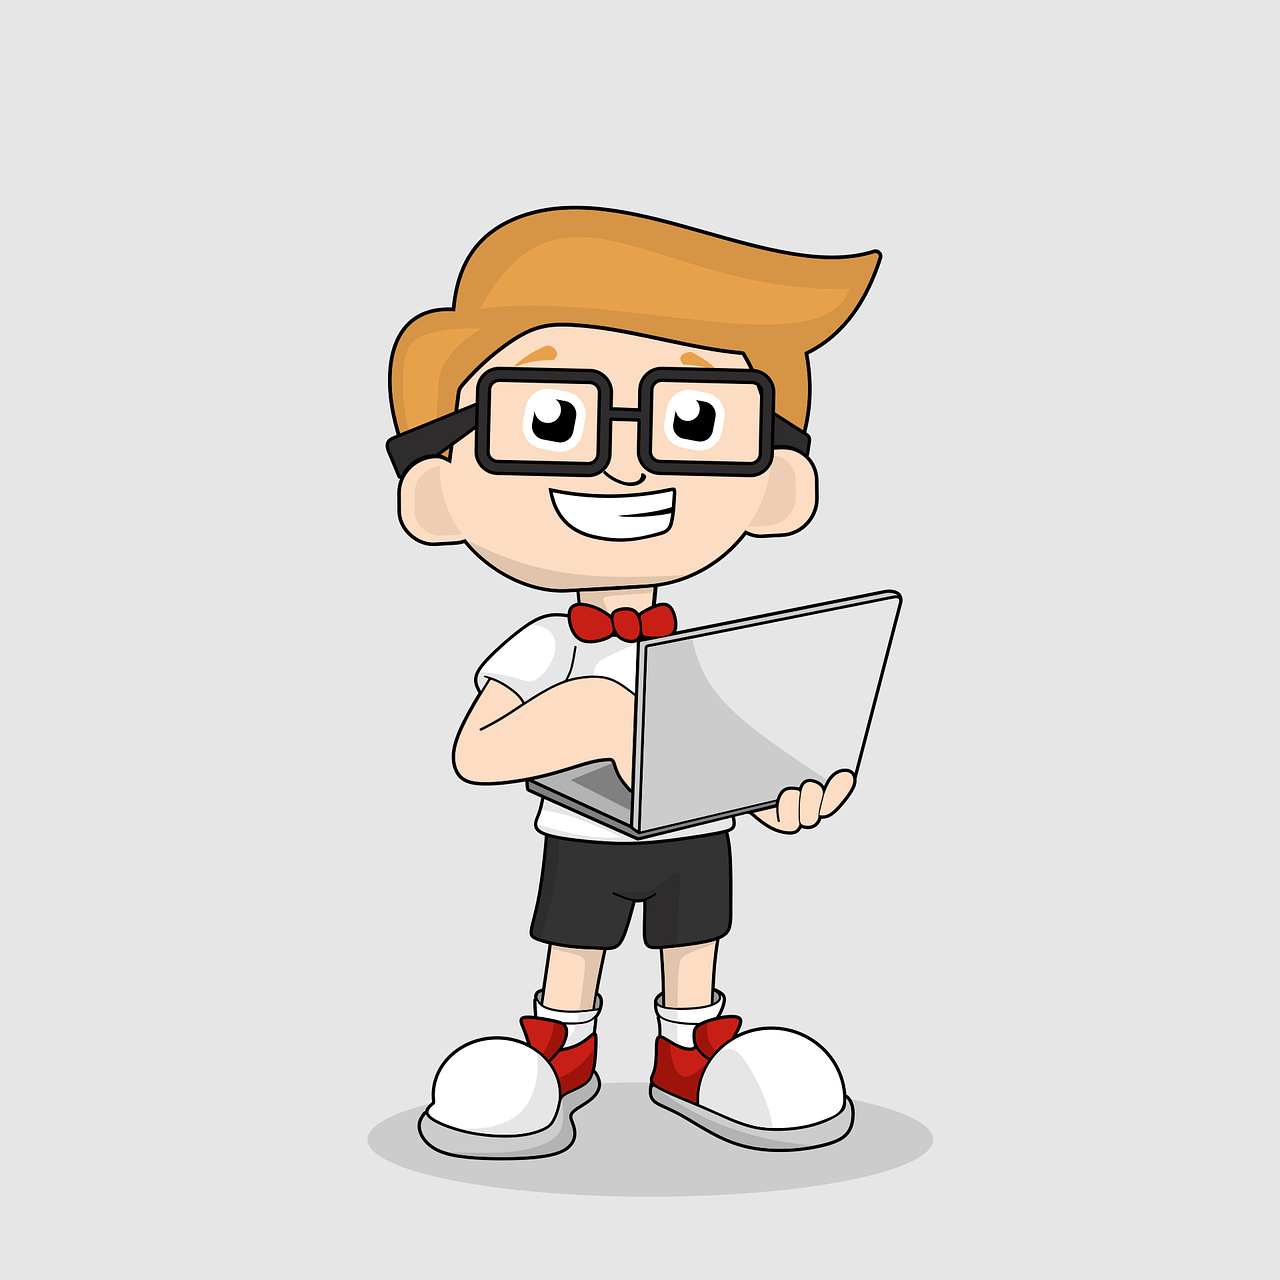 a cartoon boy with glasses holding a laptop, an illustration of, computer art, on a gray background, eddotorial illustration, children illustration, simple and clean illustration